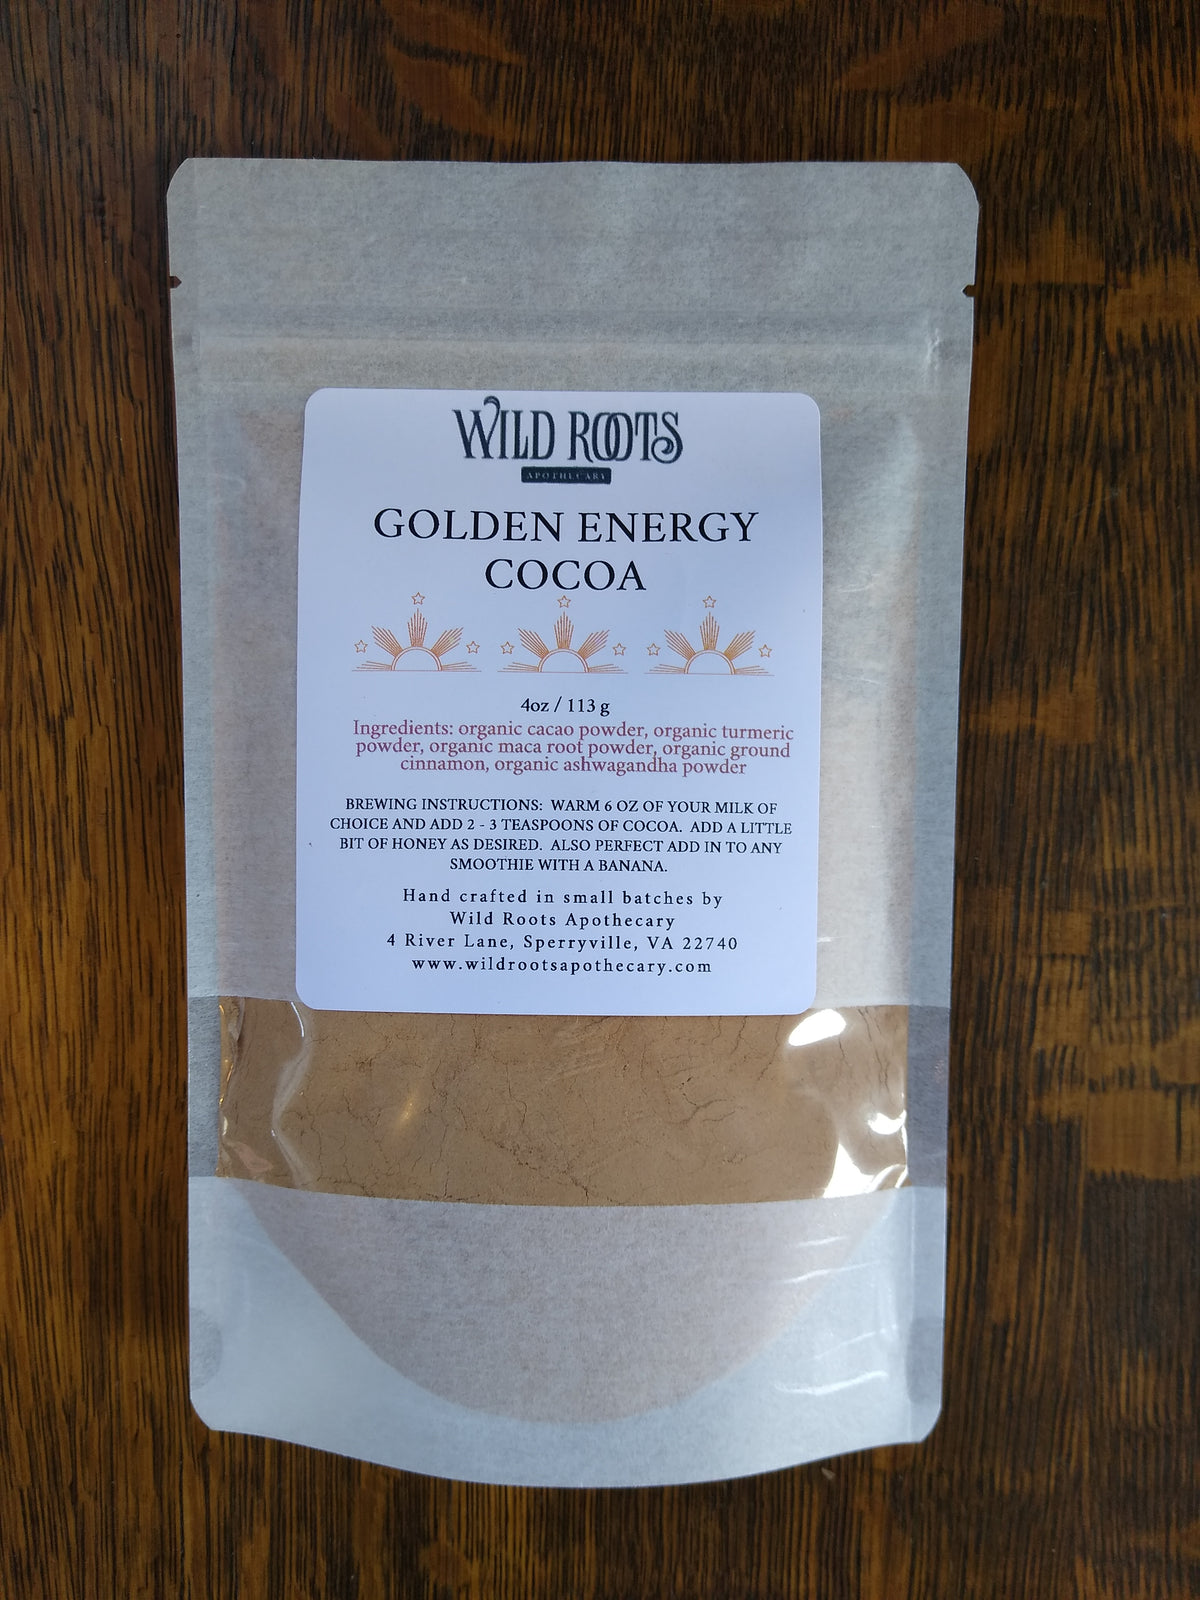 Golden Energy Cocoa—Wild Roots Apothecary